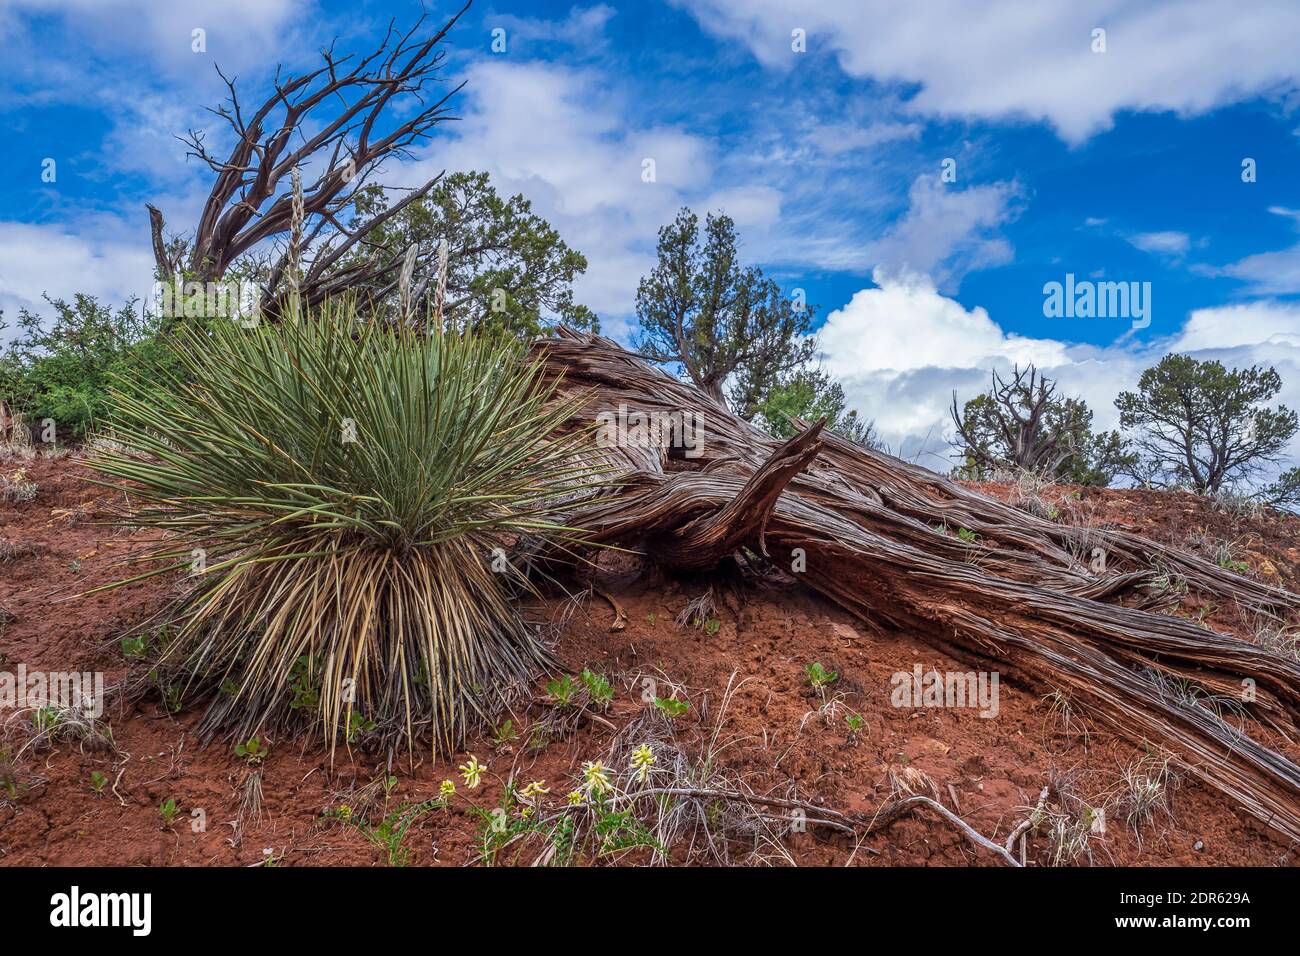 https://c8.alamy.com/comp/2DR629A/narrow-leaf-yucca-and-dead-juniper-branch-shakespeare-arch-sentinel-trail-kodachrome-basin-state-park-cannonville-utah-2DR629A.jpg